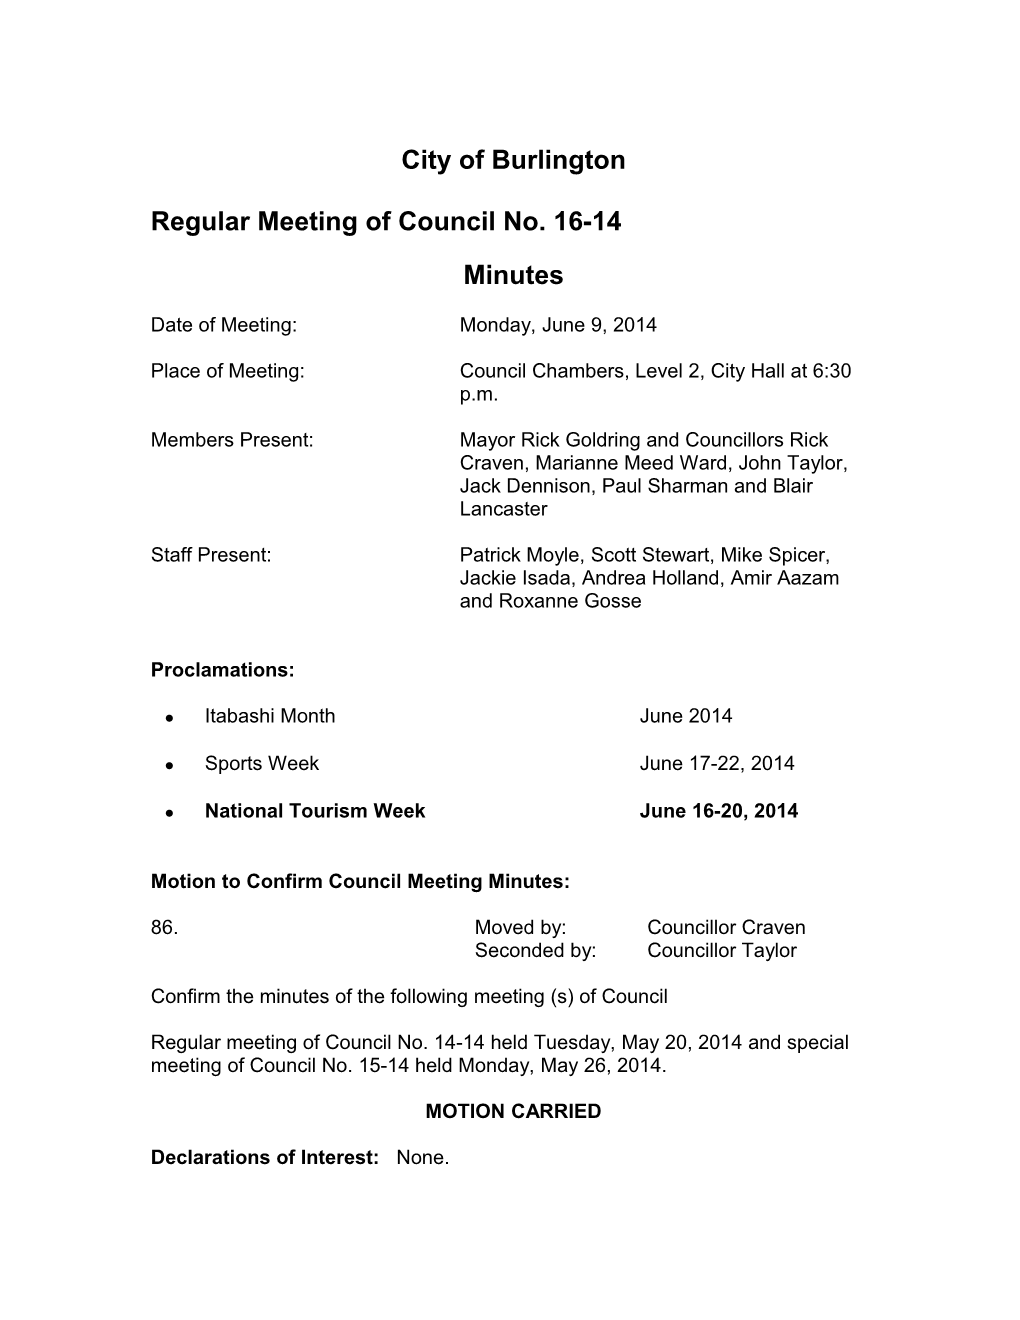 Motion to Confirm Council Meeting Minutes